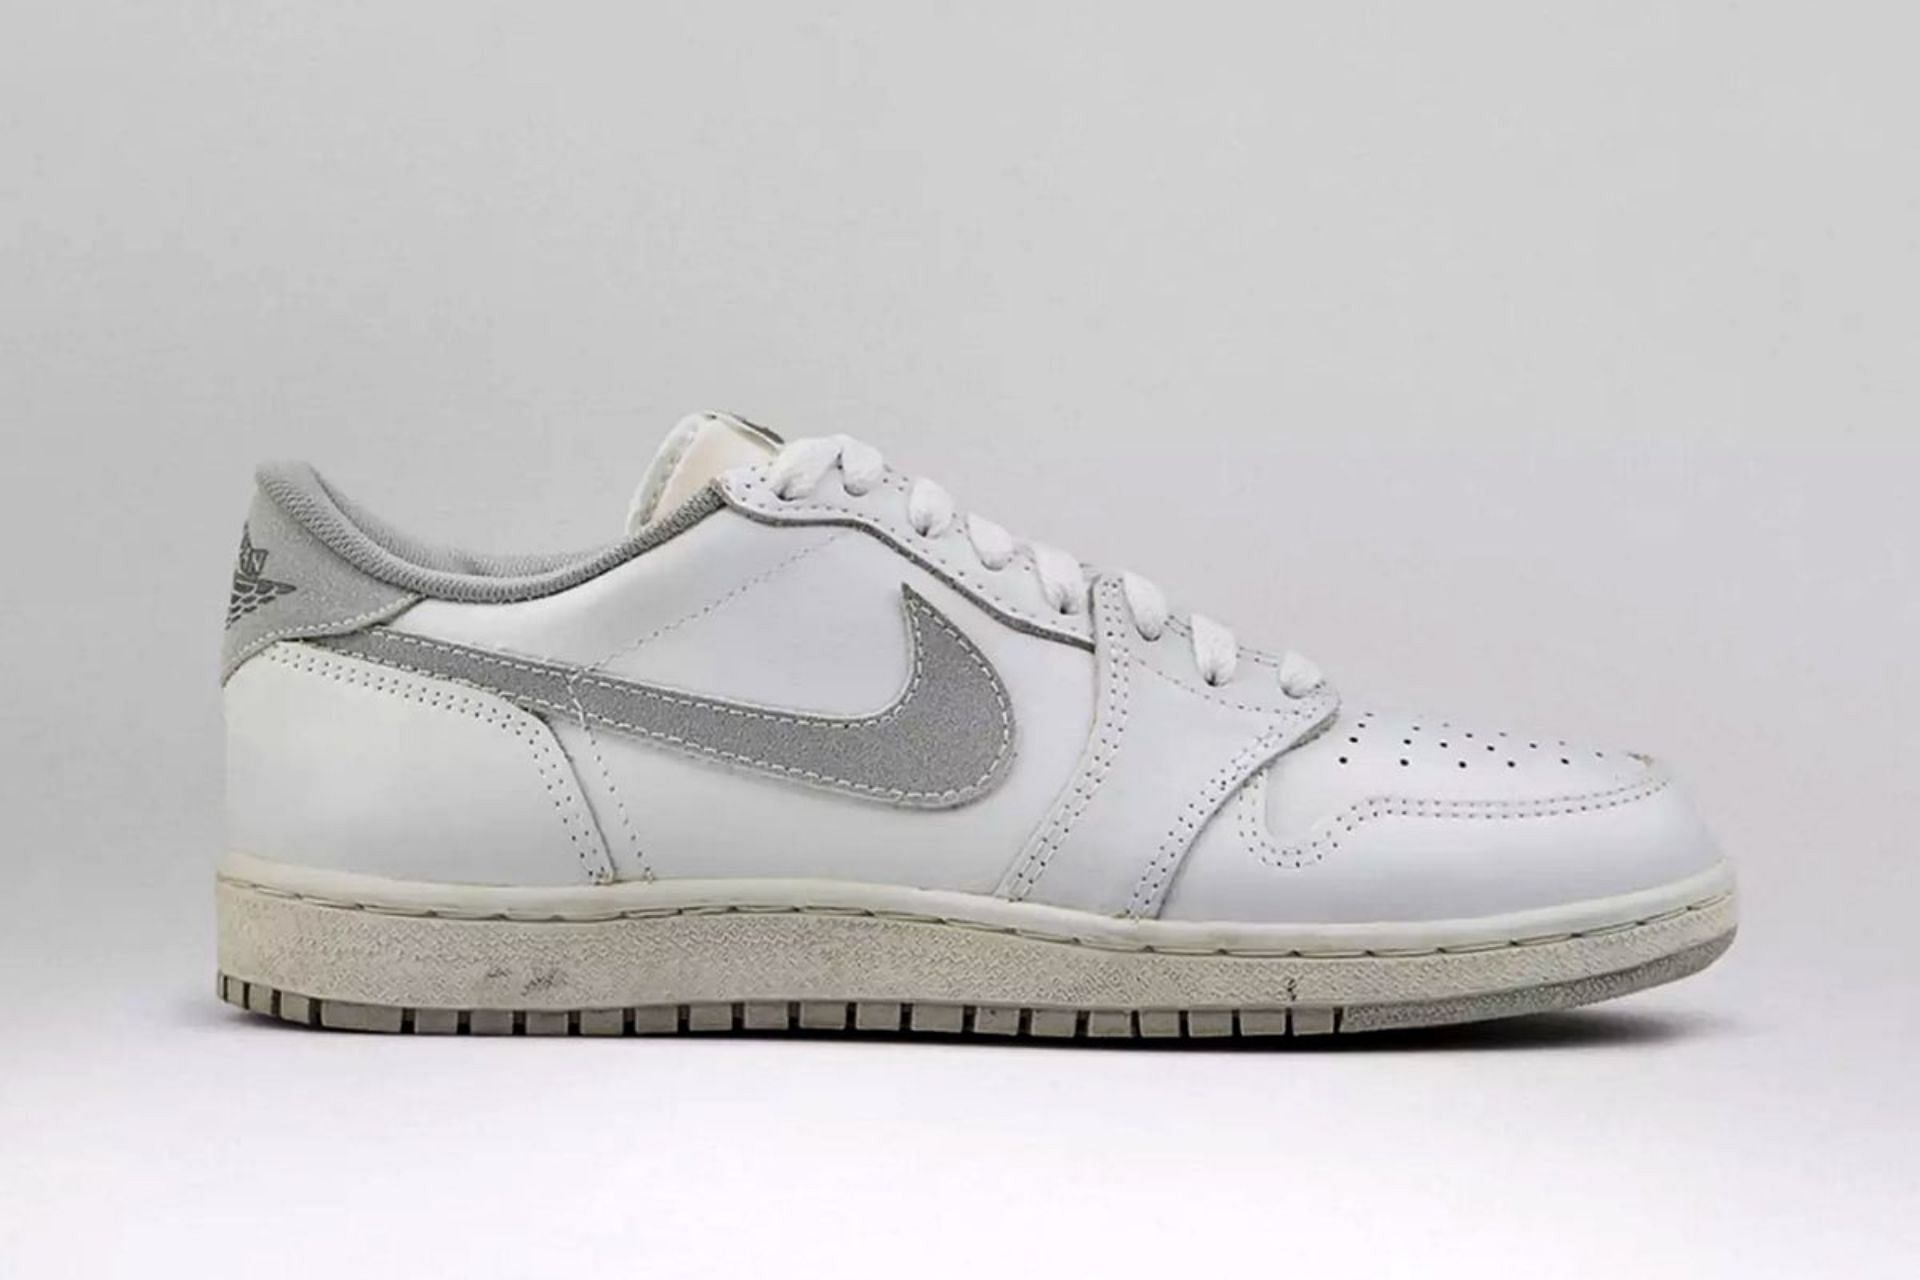 Take a closer look at the upcoming AJ 1 Low Neutral Gray colorway (Image via Sole Retreiver)